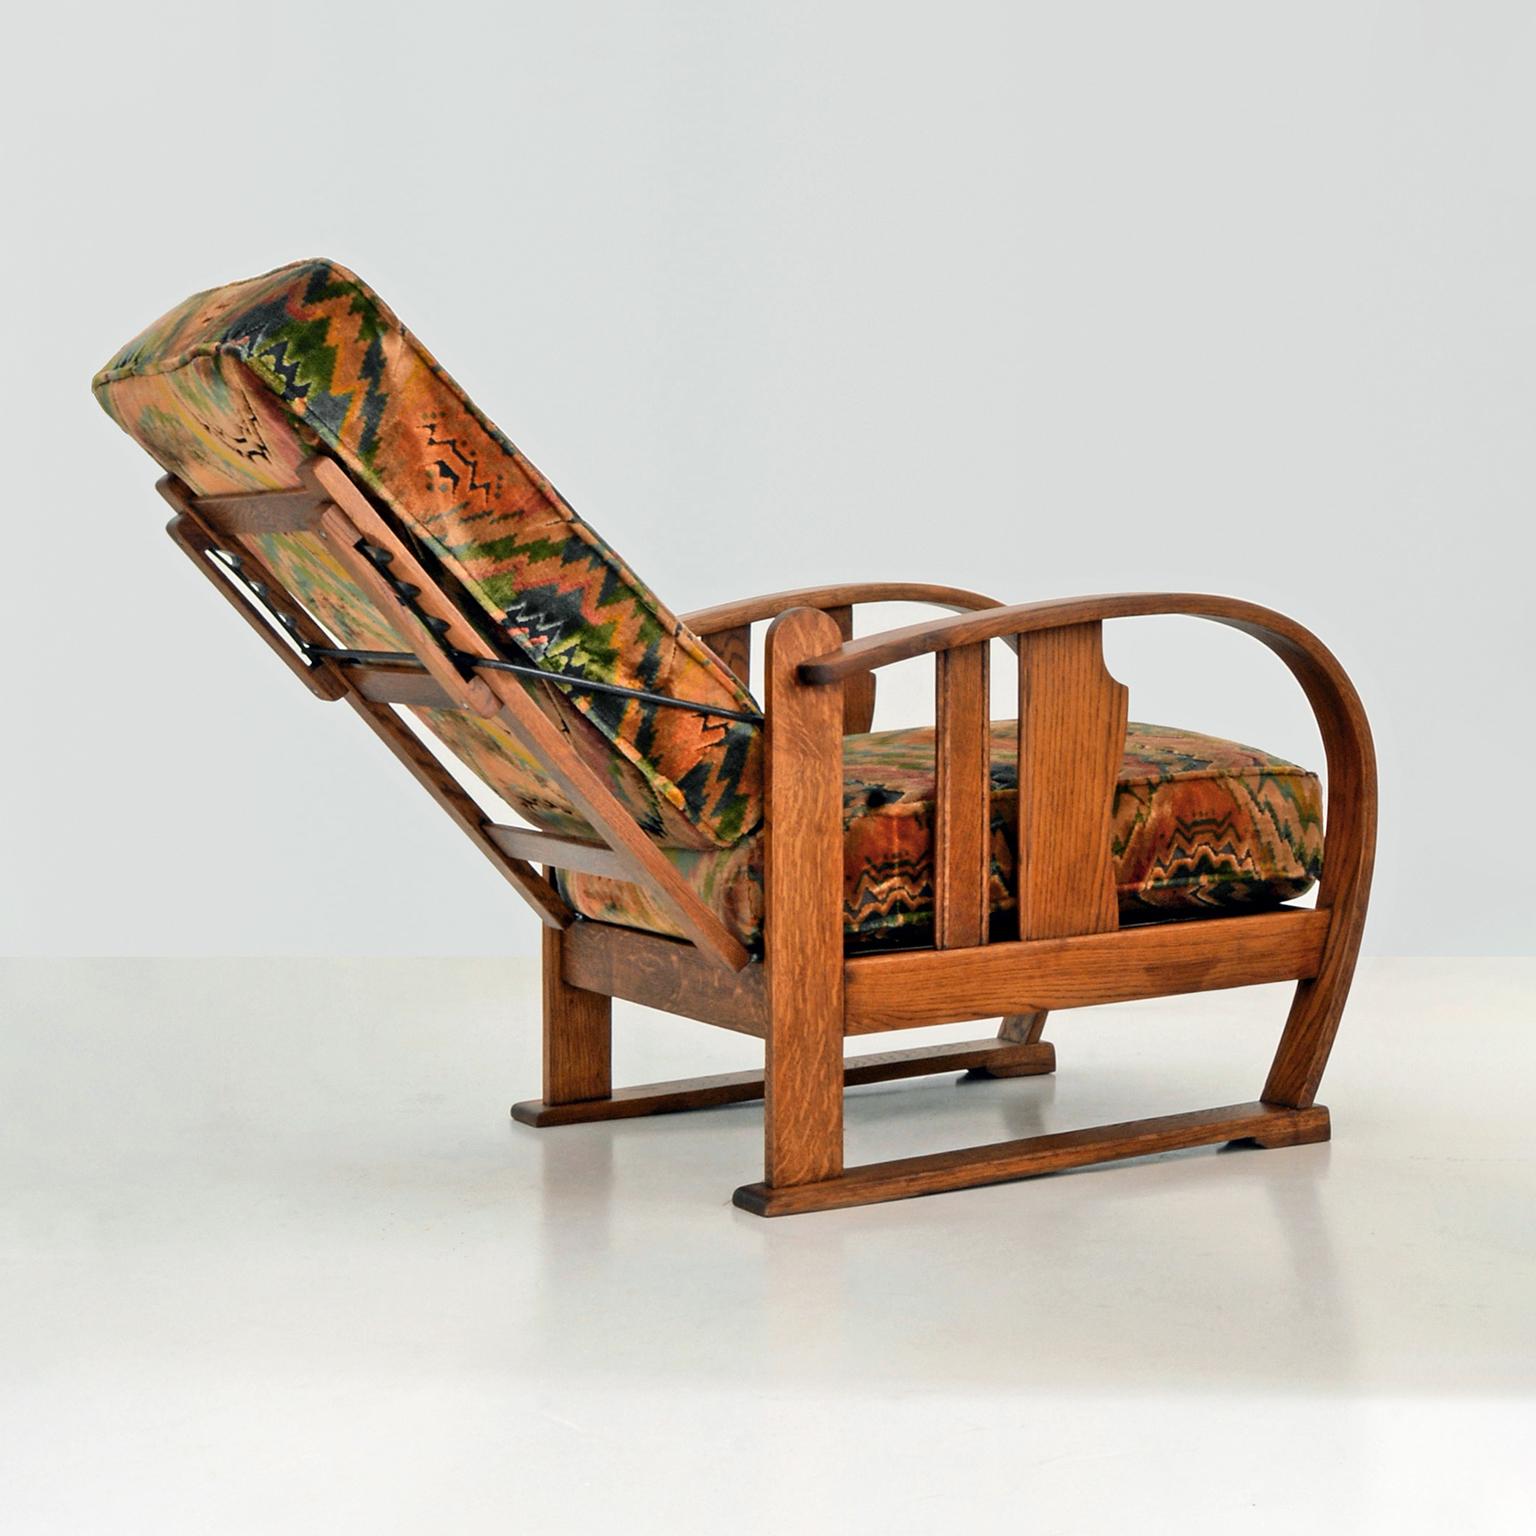 Oiled Expressionist Amsterdam School Reclining Chairs, Oak and Fabric Upholstery, 1920 For Sale